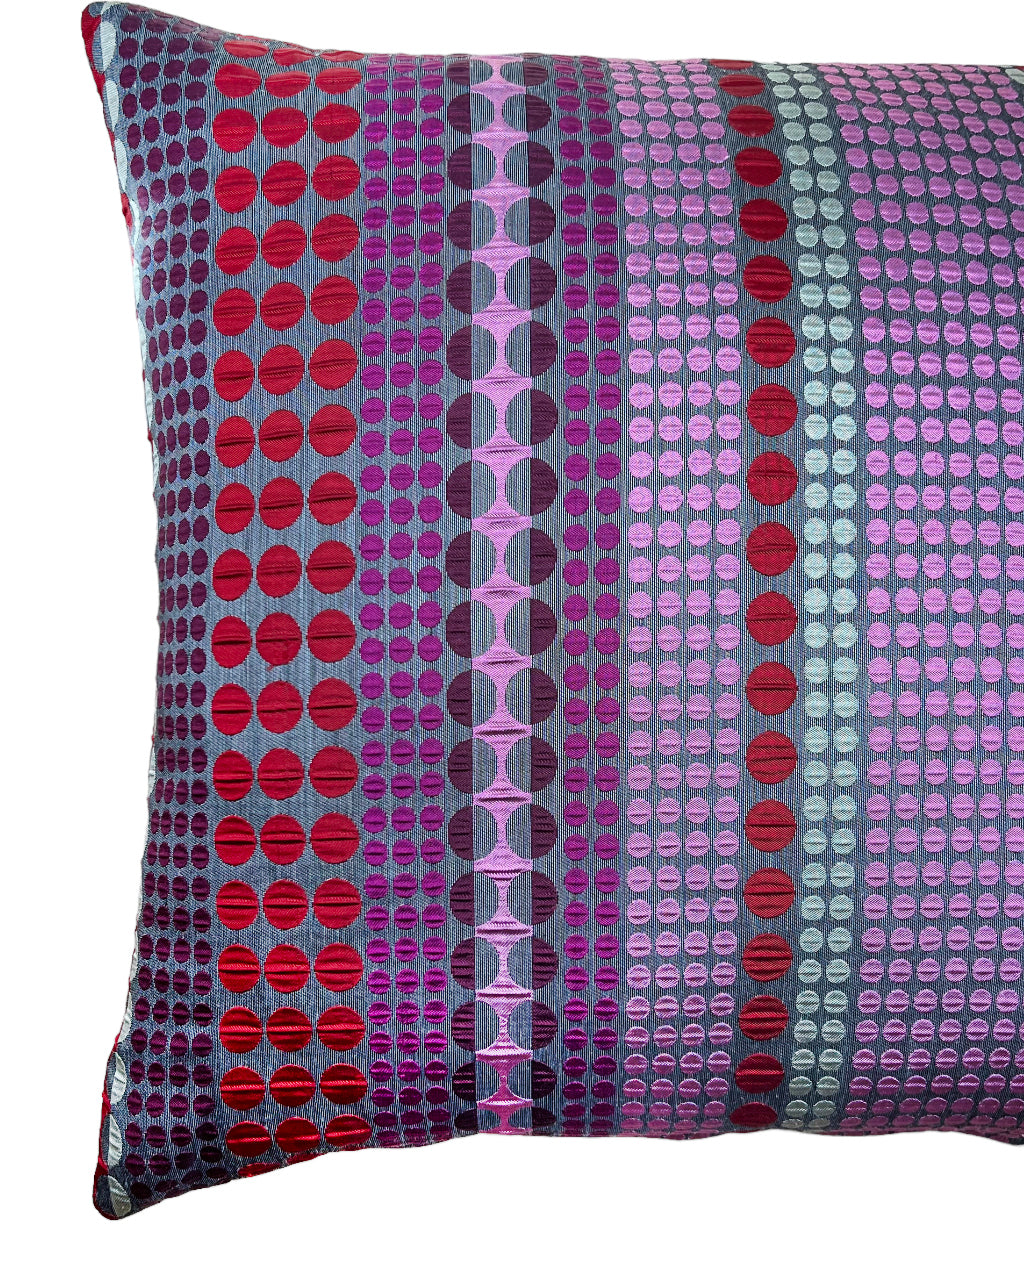 Rubina pillow by Margo Selby